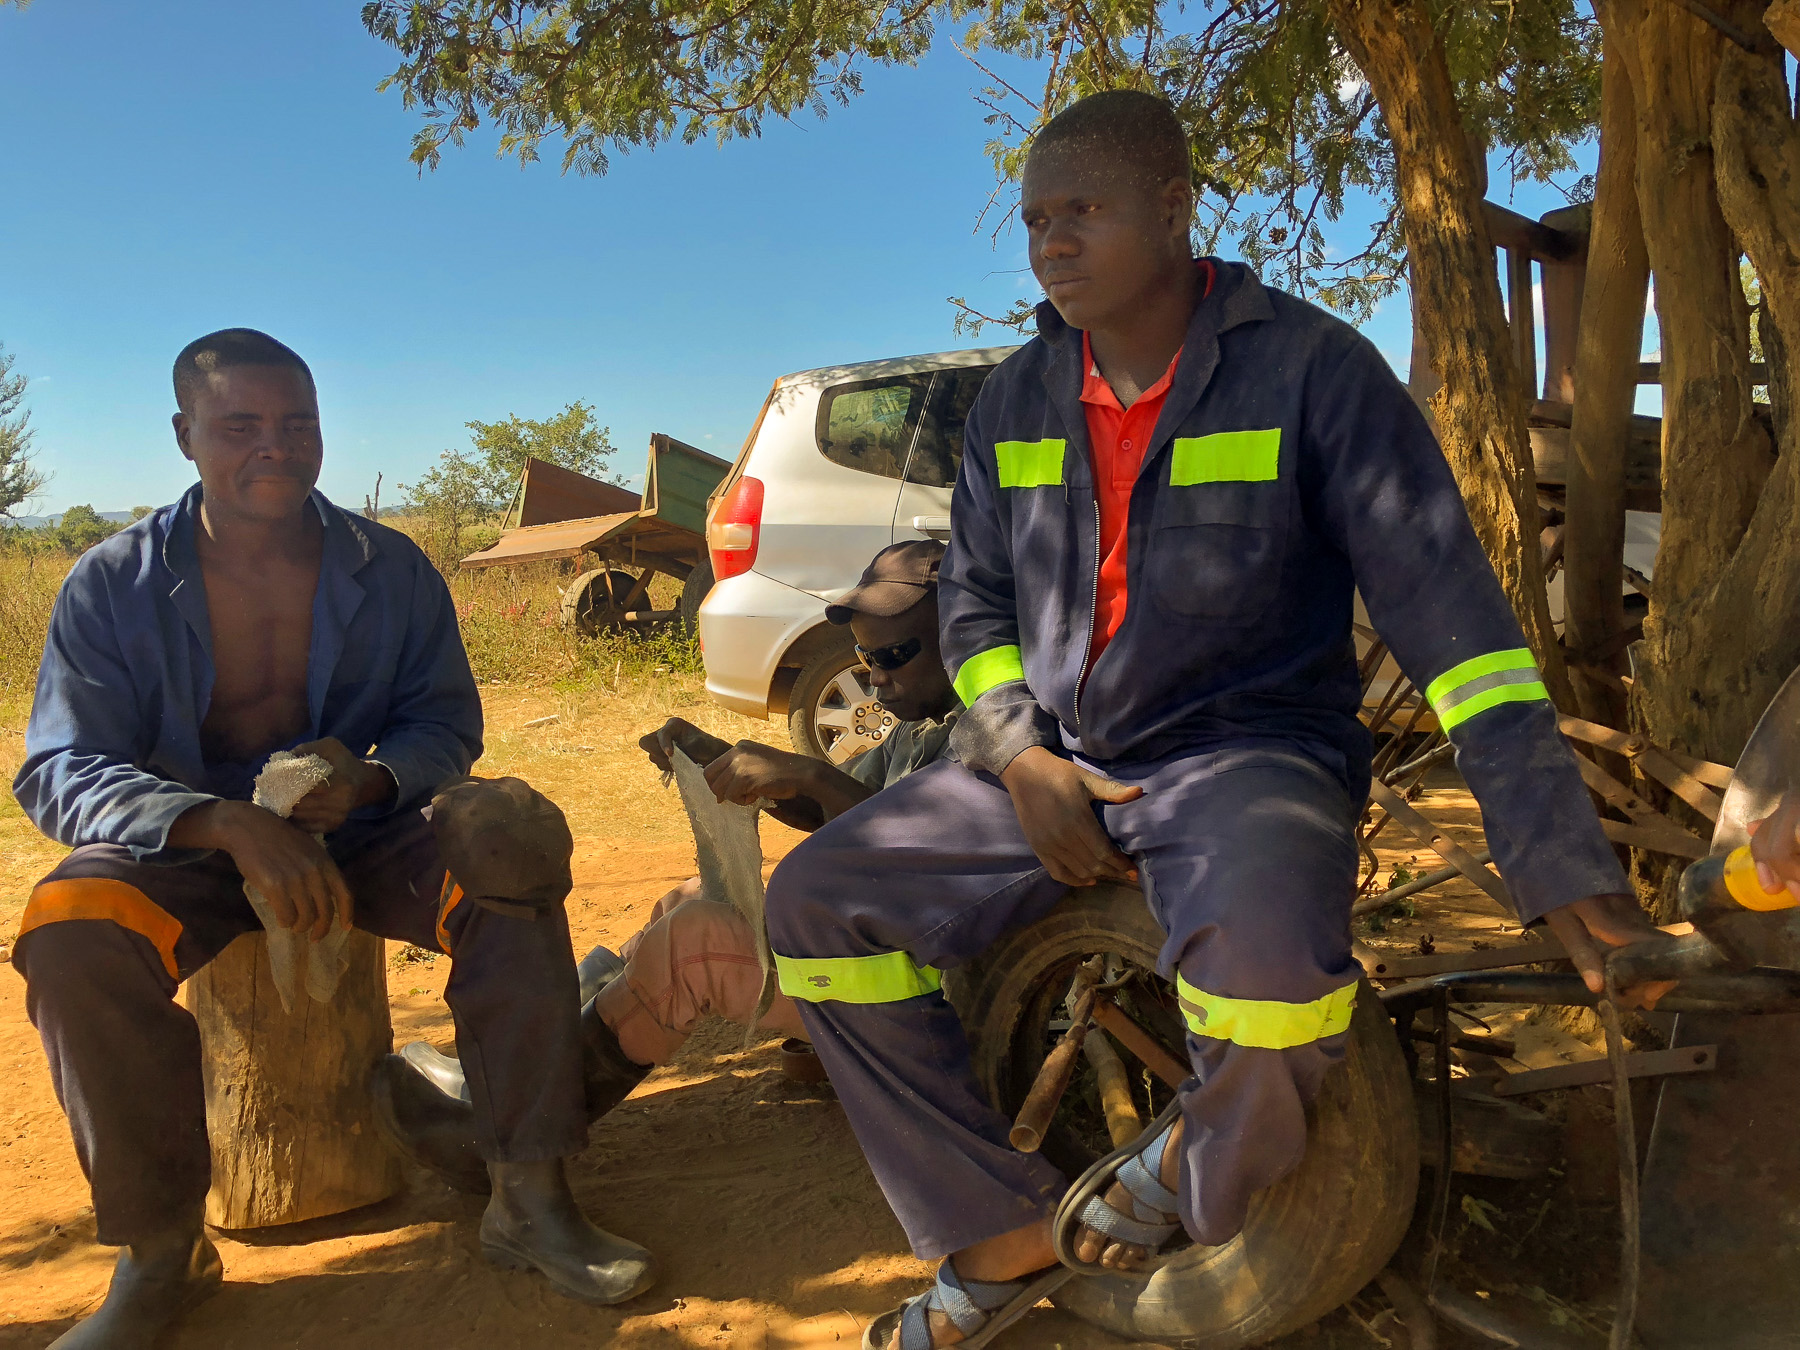 Masimba Mawire, 30, and Gift Chawara, 28, take a break from shelling and rest under a tree. The small car behind was bought by Chawara with his profits earned from the mechanization service business. (Photo: Matthew O’Leary/CIMMYT)